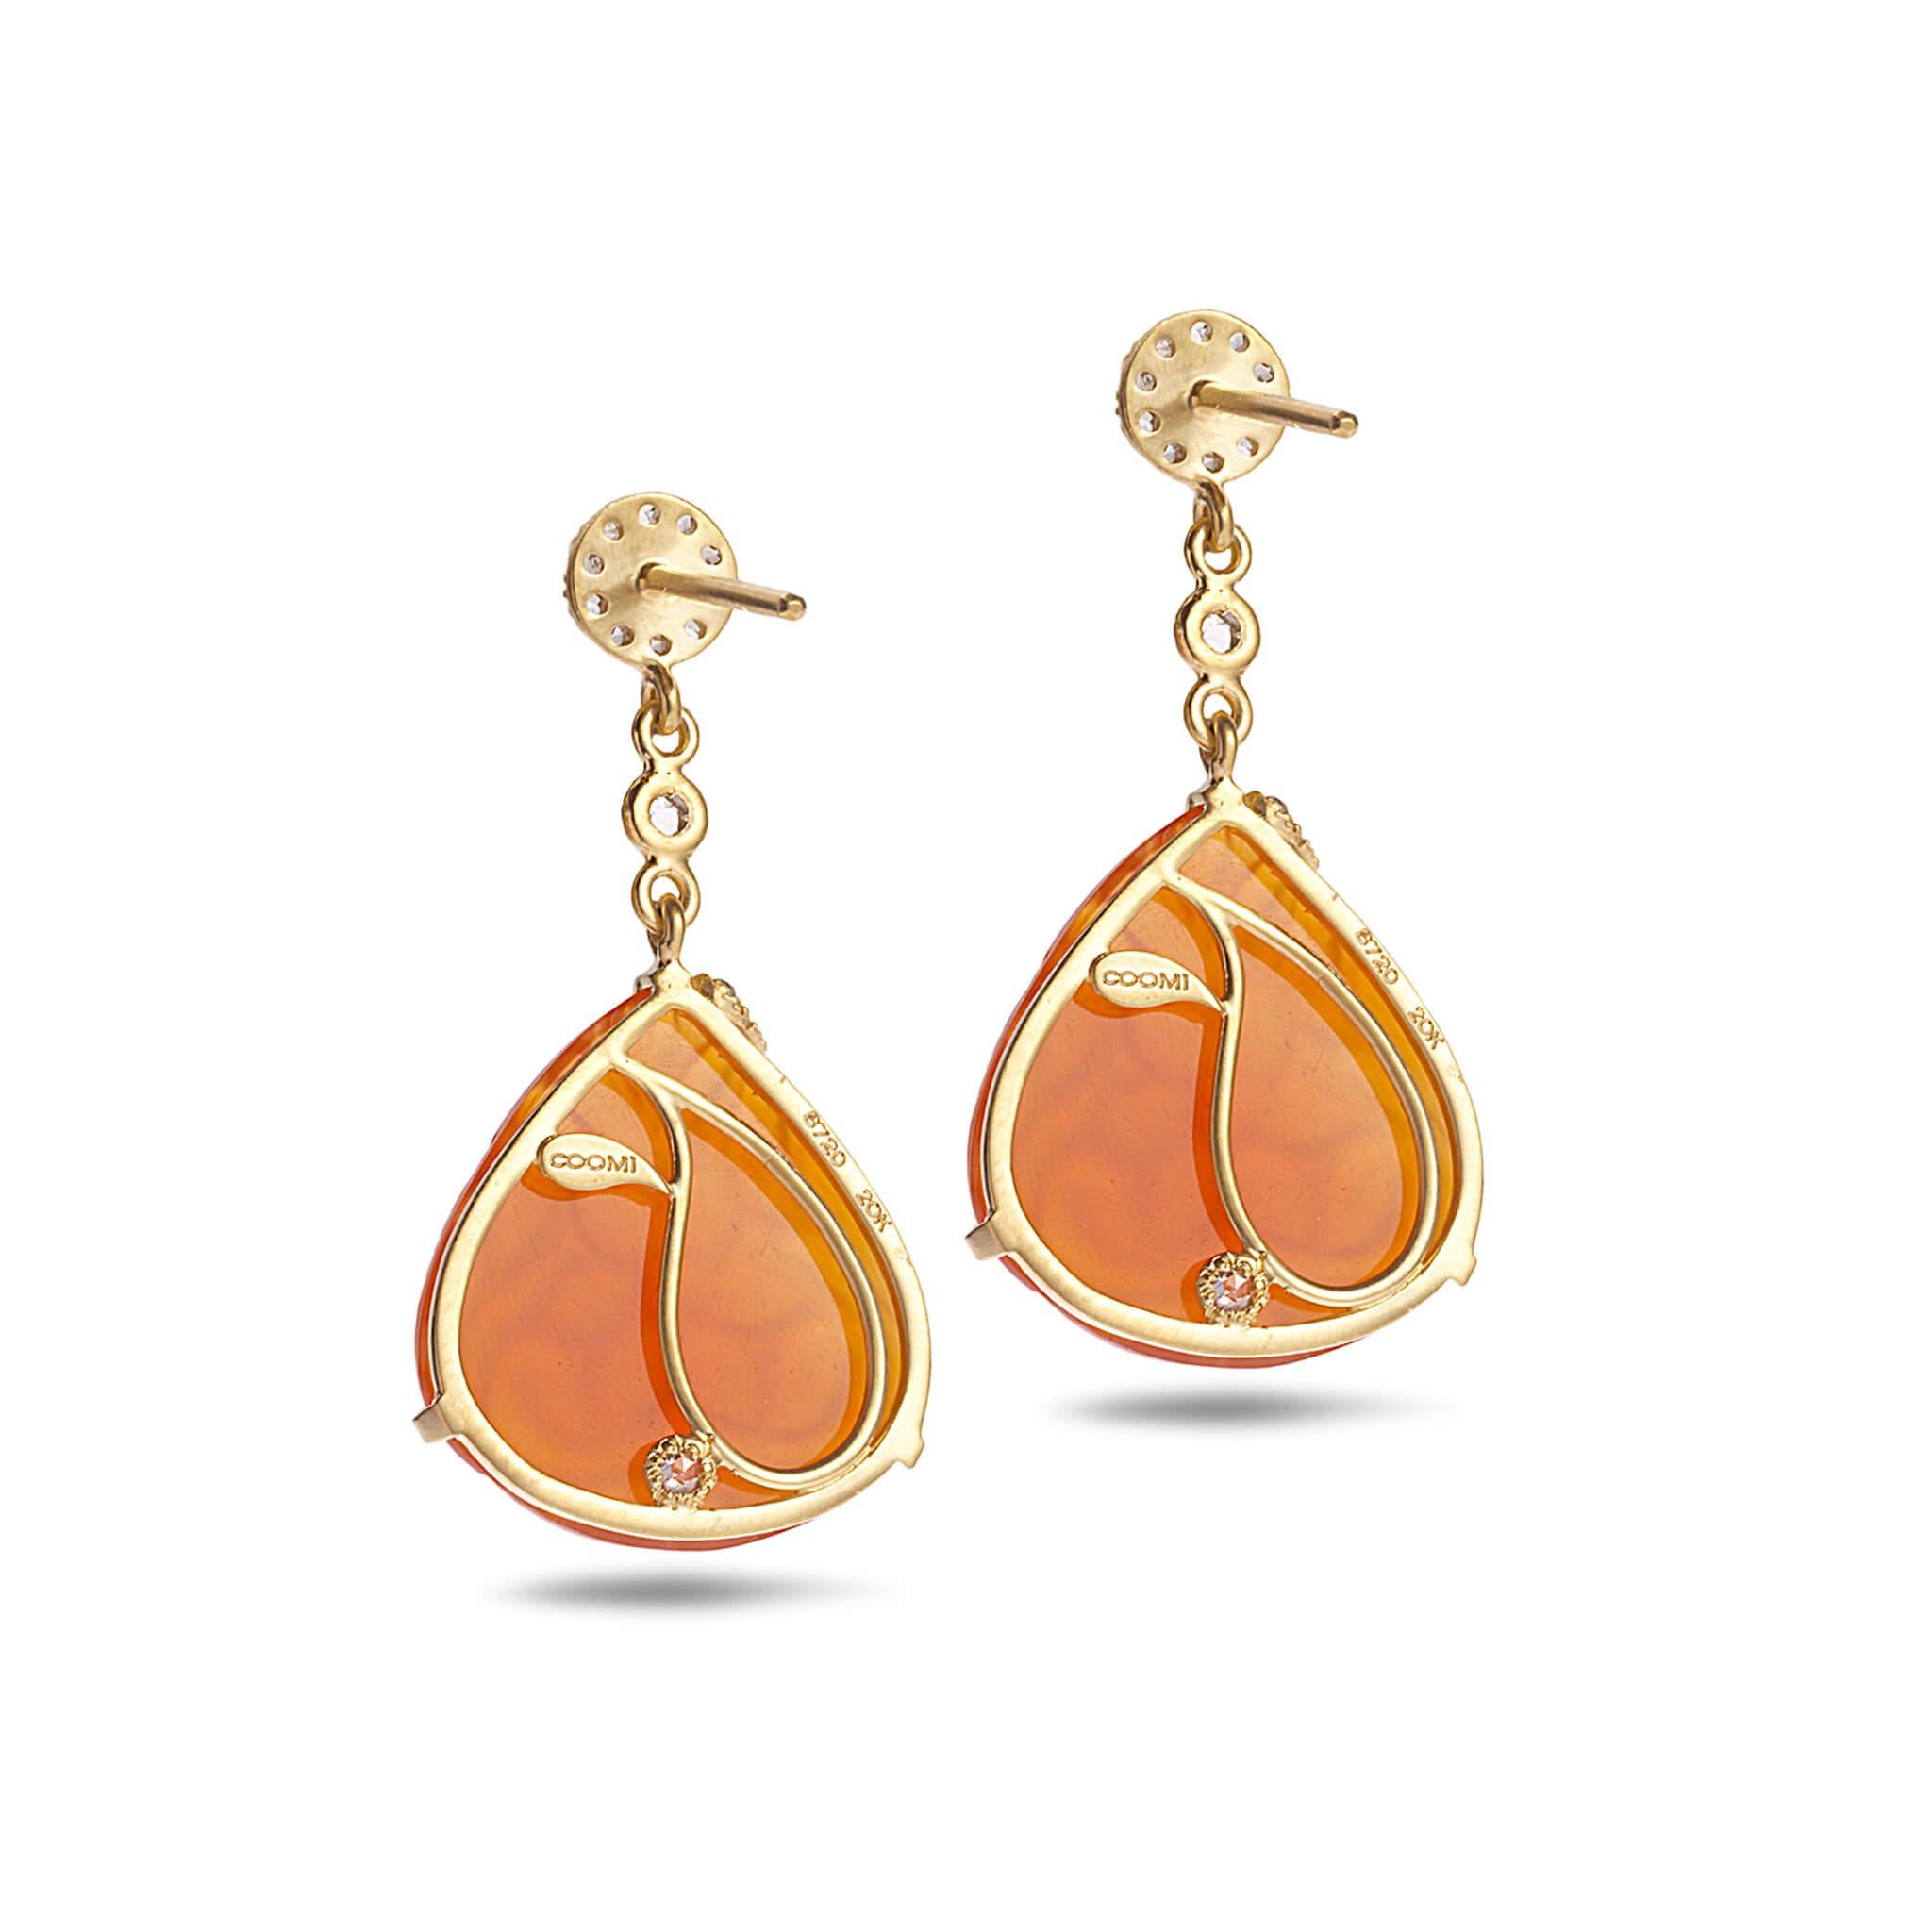 Affinity earrings set in 20K yellow gold with 14.21cts carnelian and 0.49cts diamond. Earrings measure 1.25 inches in length and 5/8 of an inch at the widest part.
